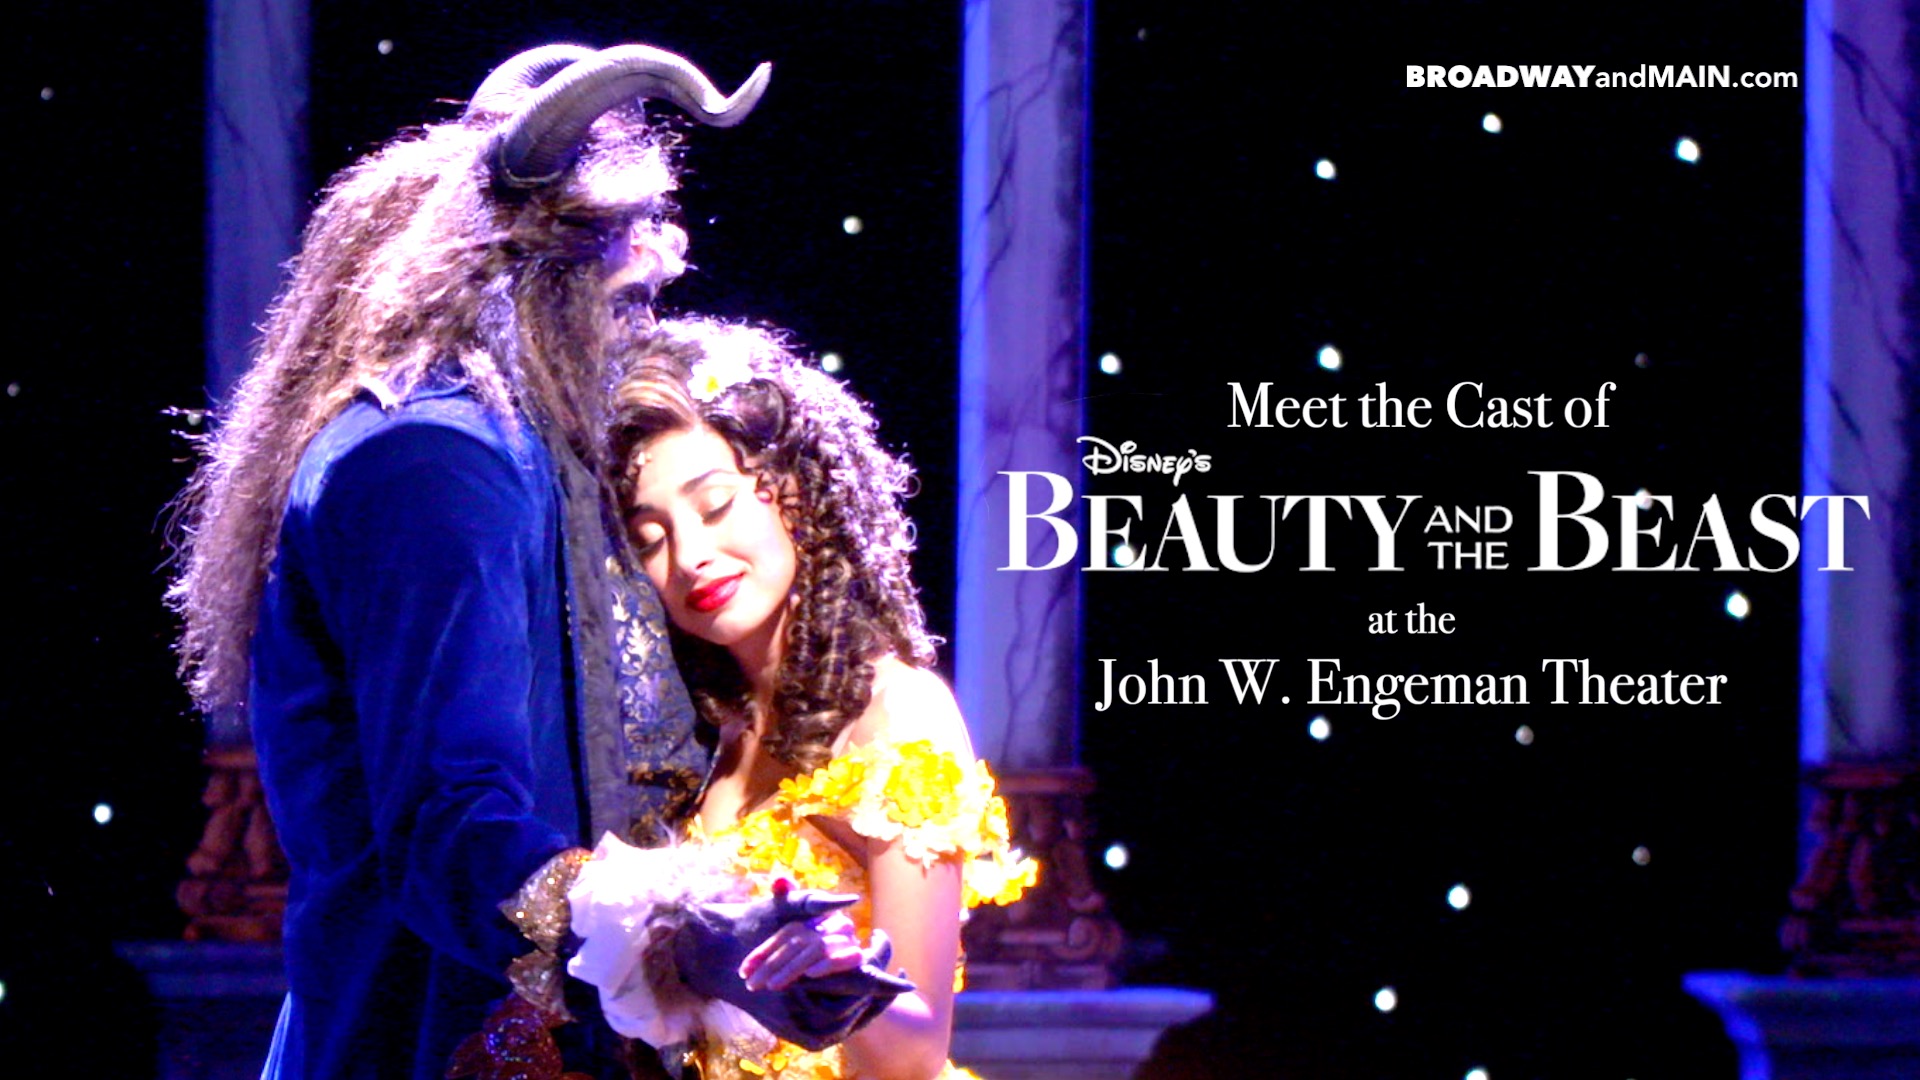 Meet The cast of Beauty and The Beast at the Engeman Theater